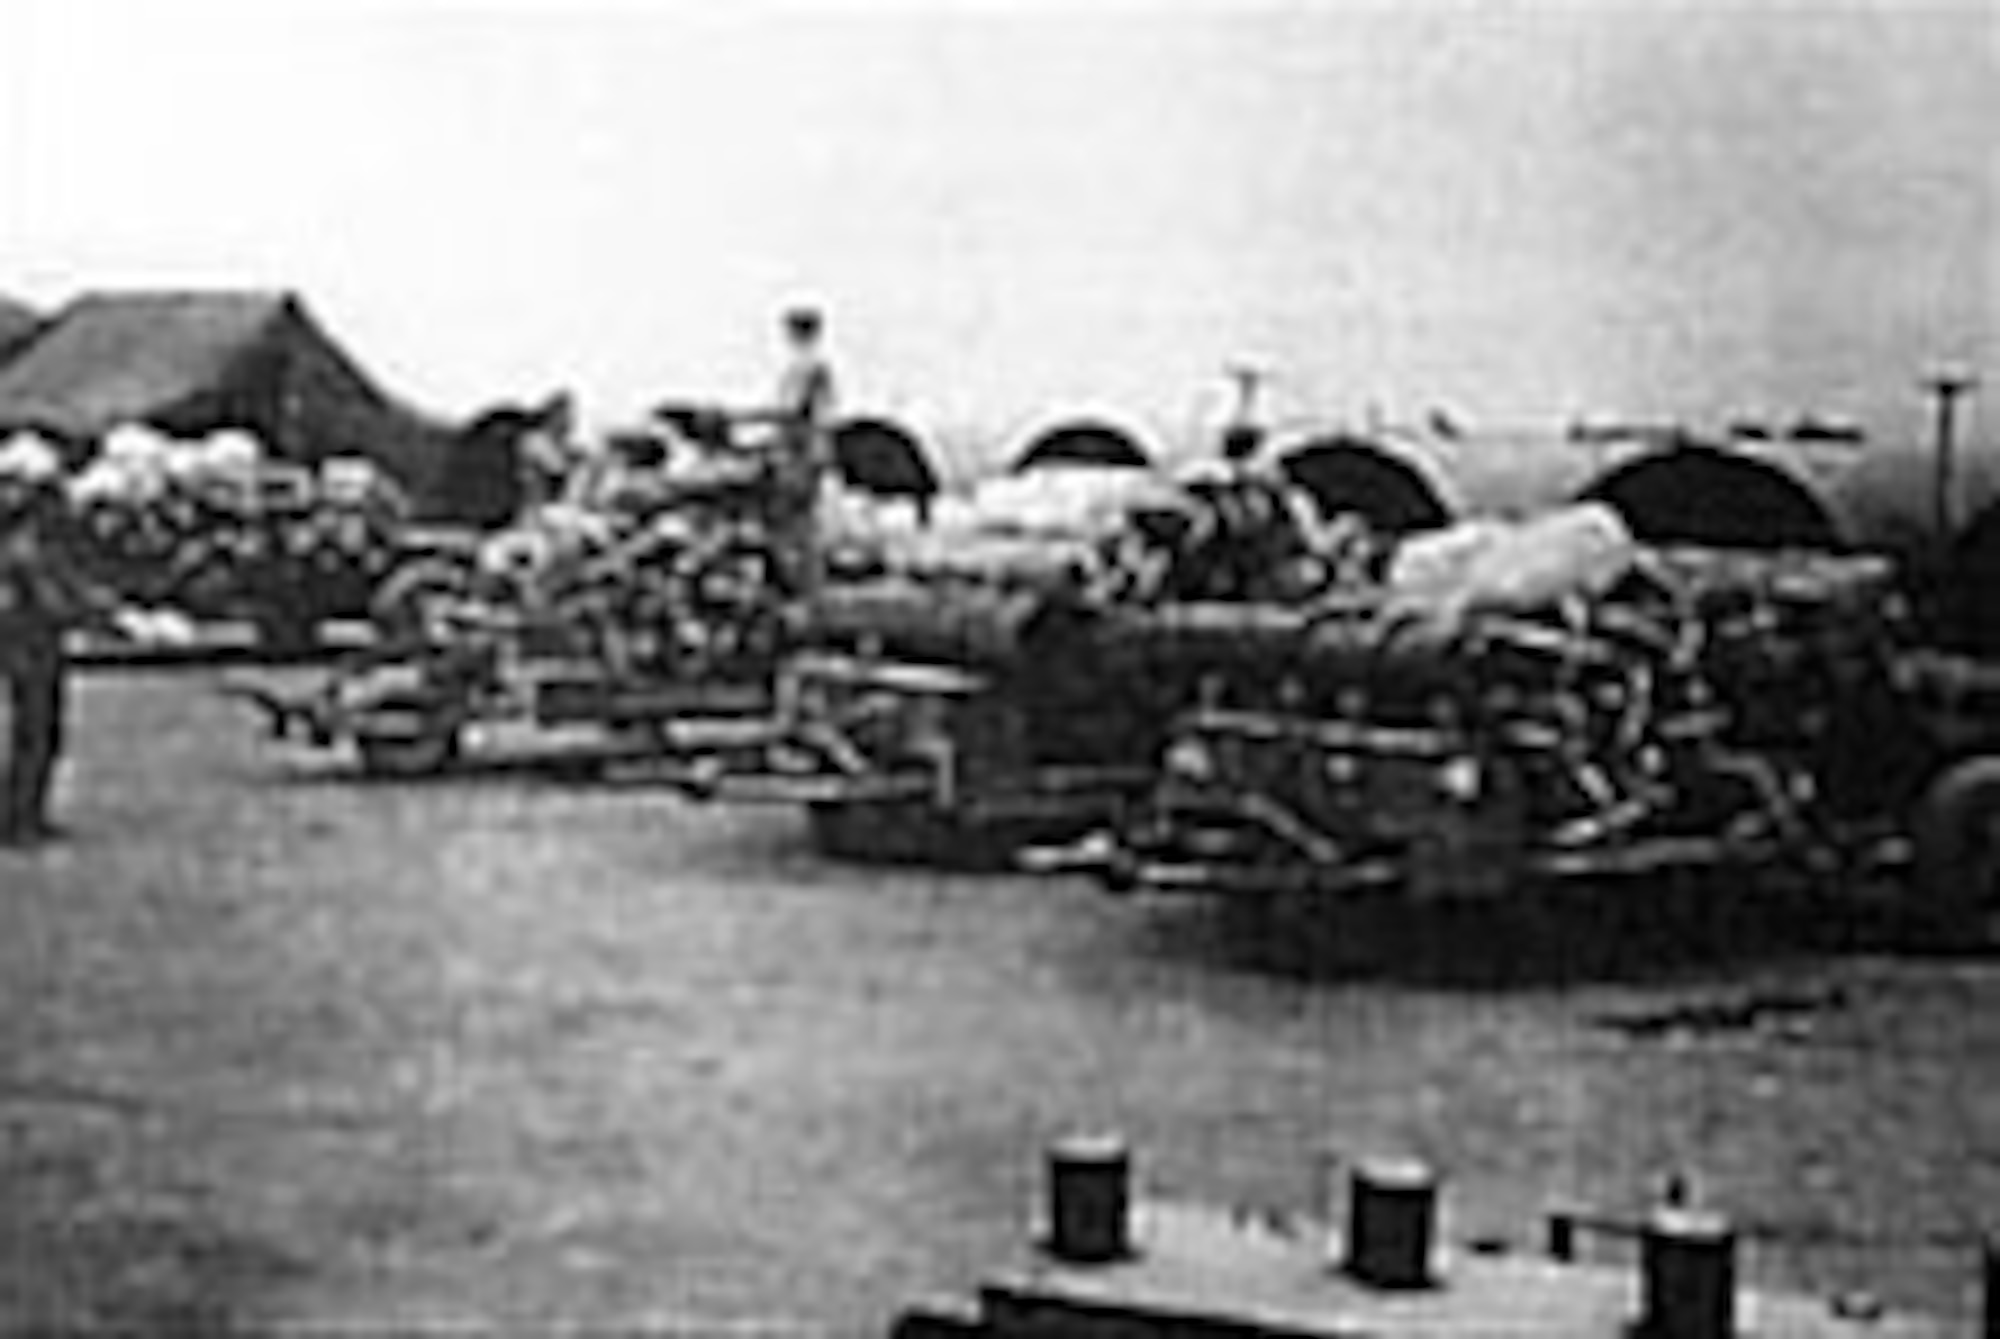 Loads carefully packed onto trailers at Holmewood, England, under tight security were taken to Harrington, where they were loaded onto the aircraft for a mission. (U.S. Air Force photo)